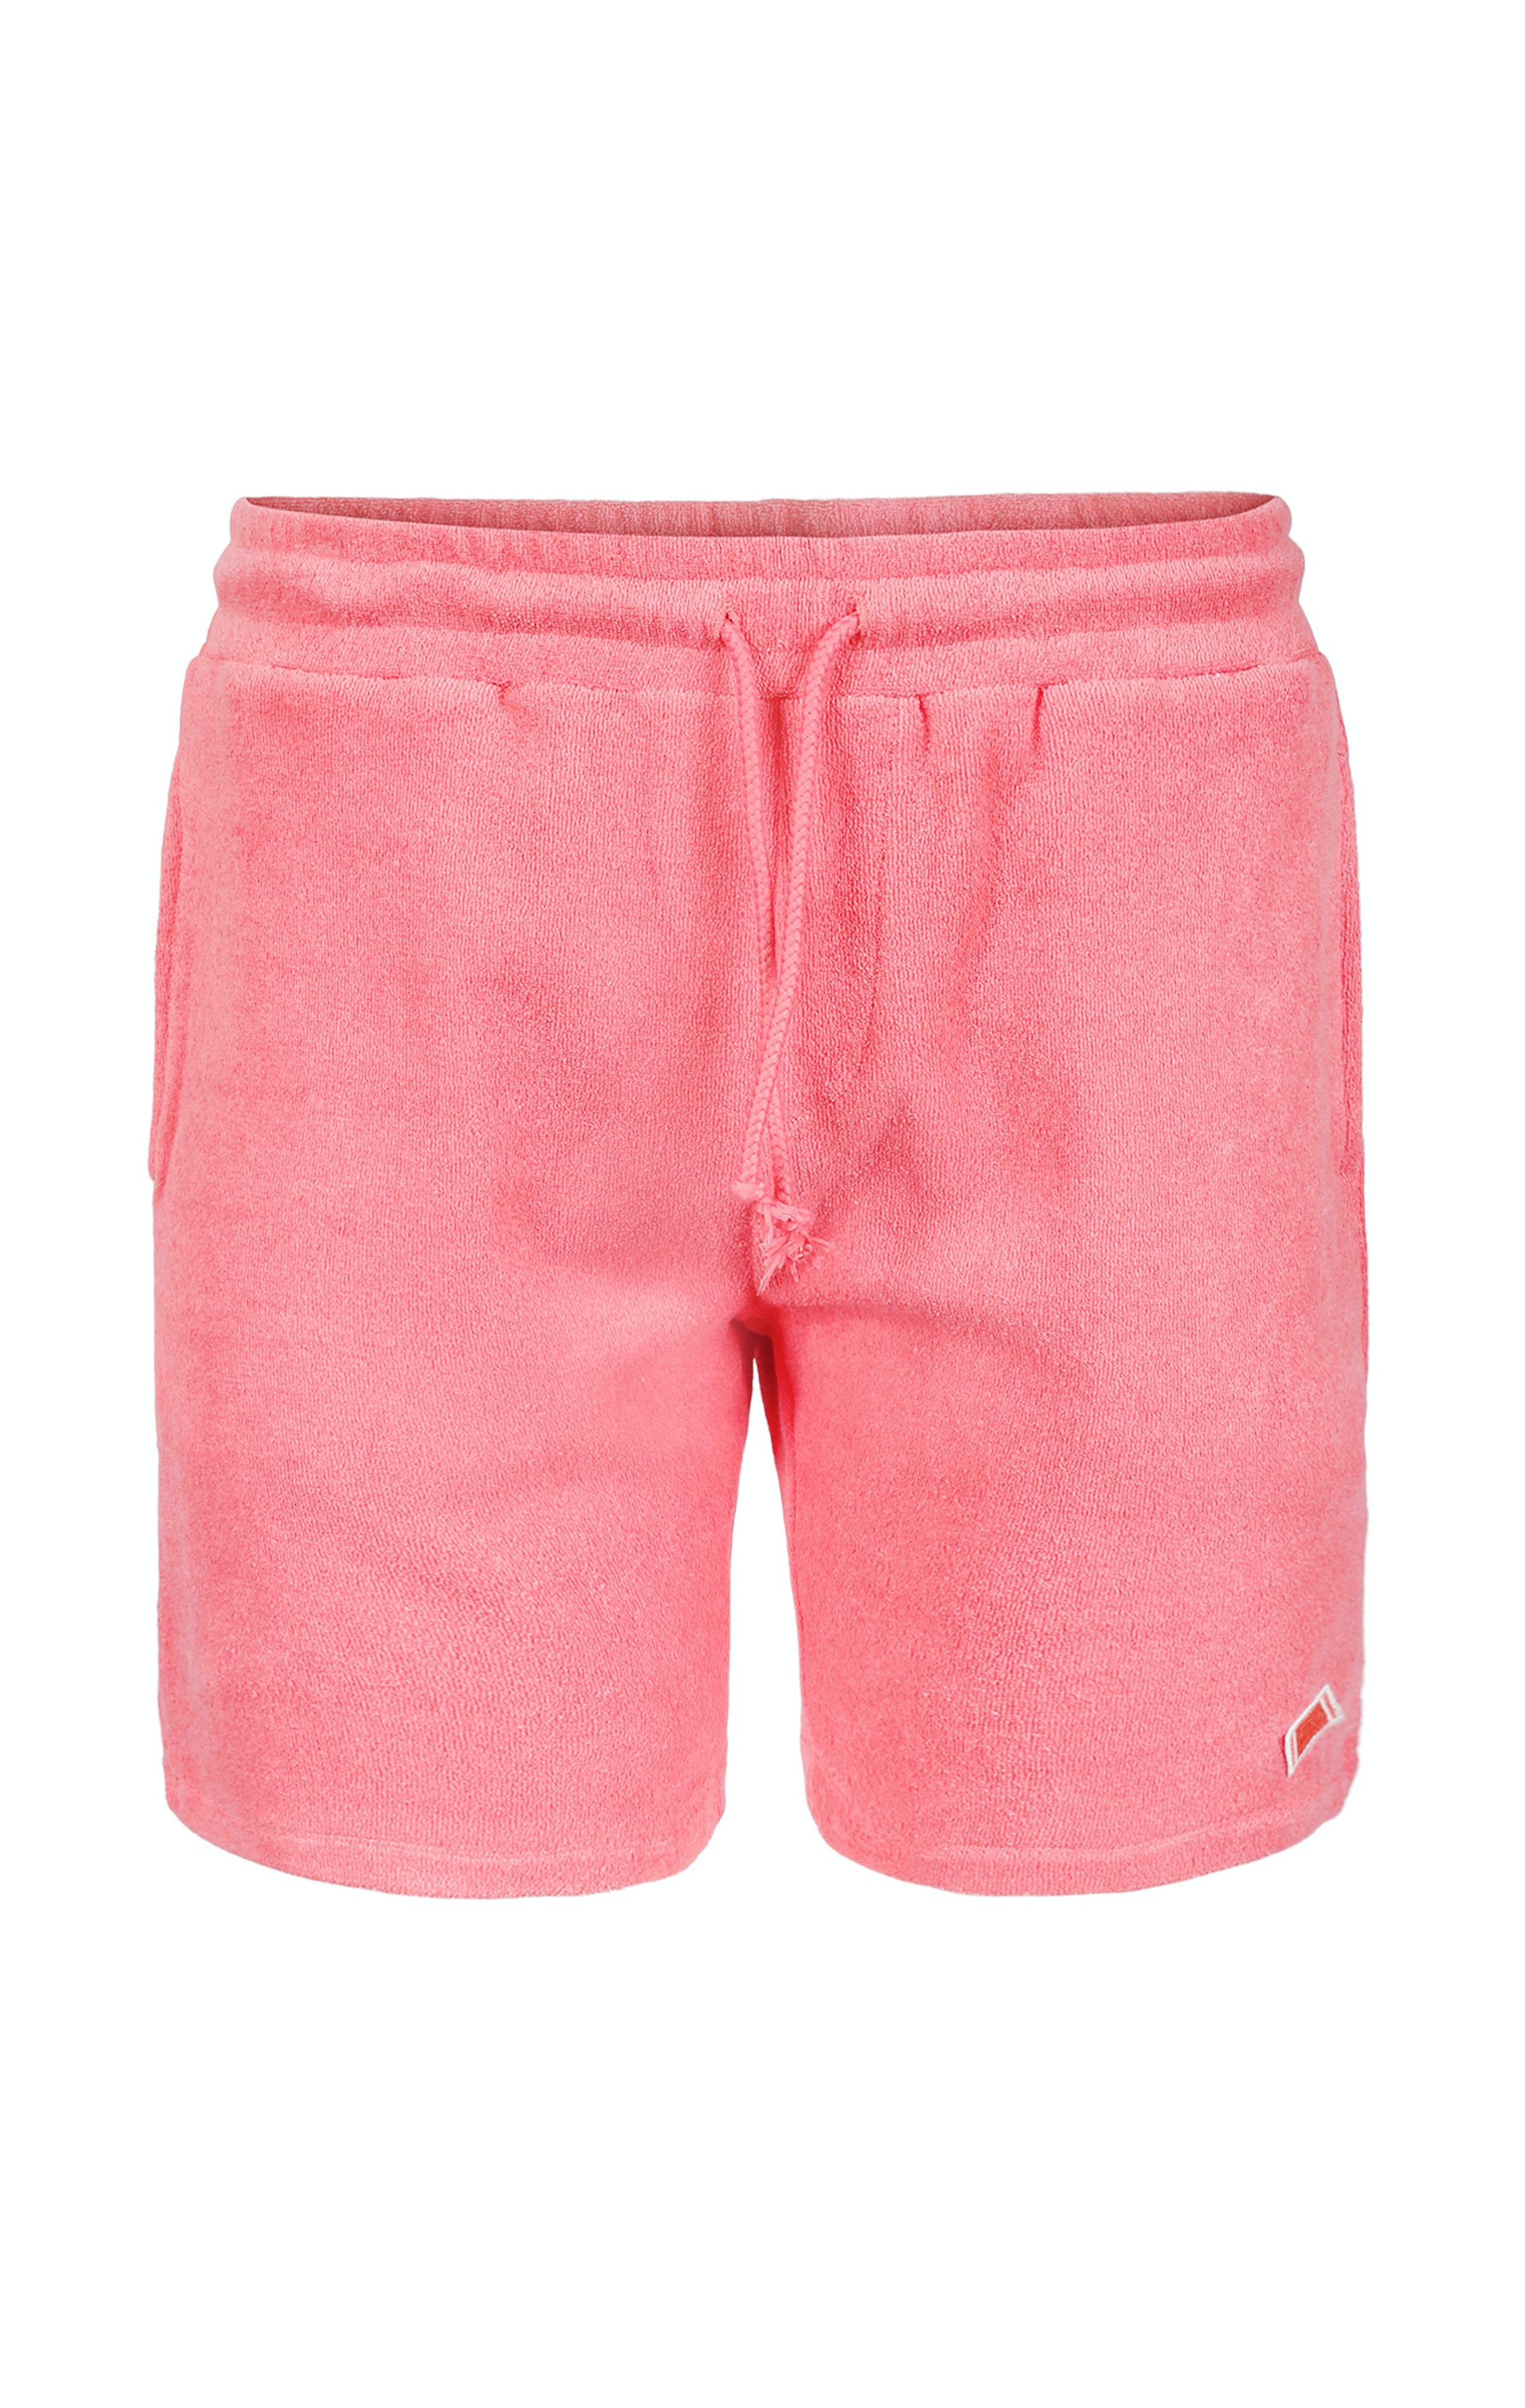 Onepiece Towel Club Shorts Coral - 1